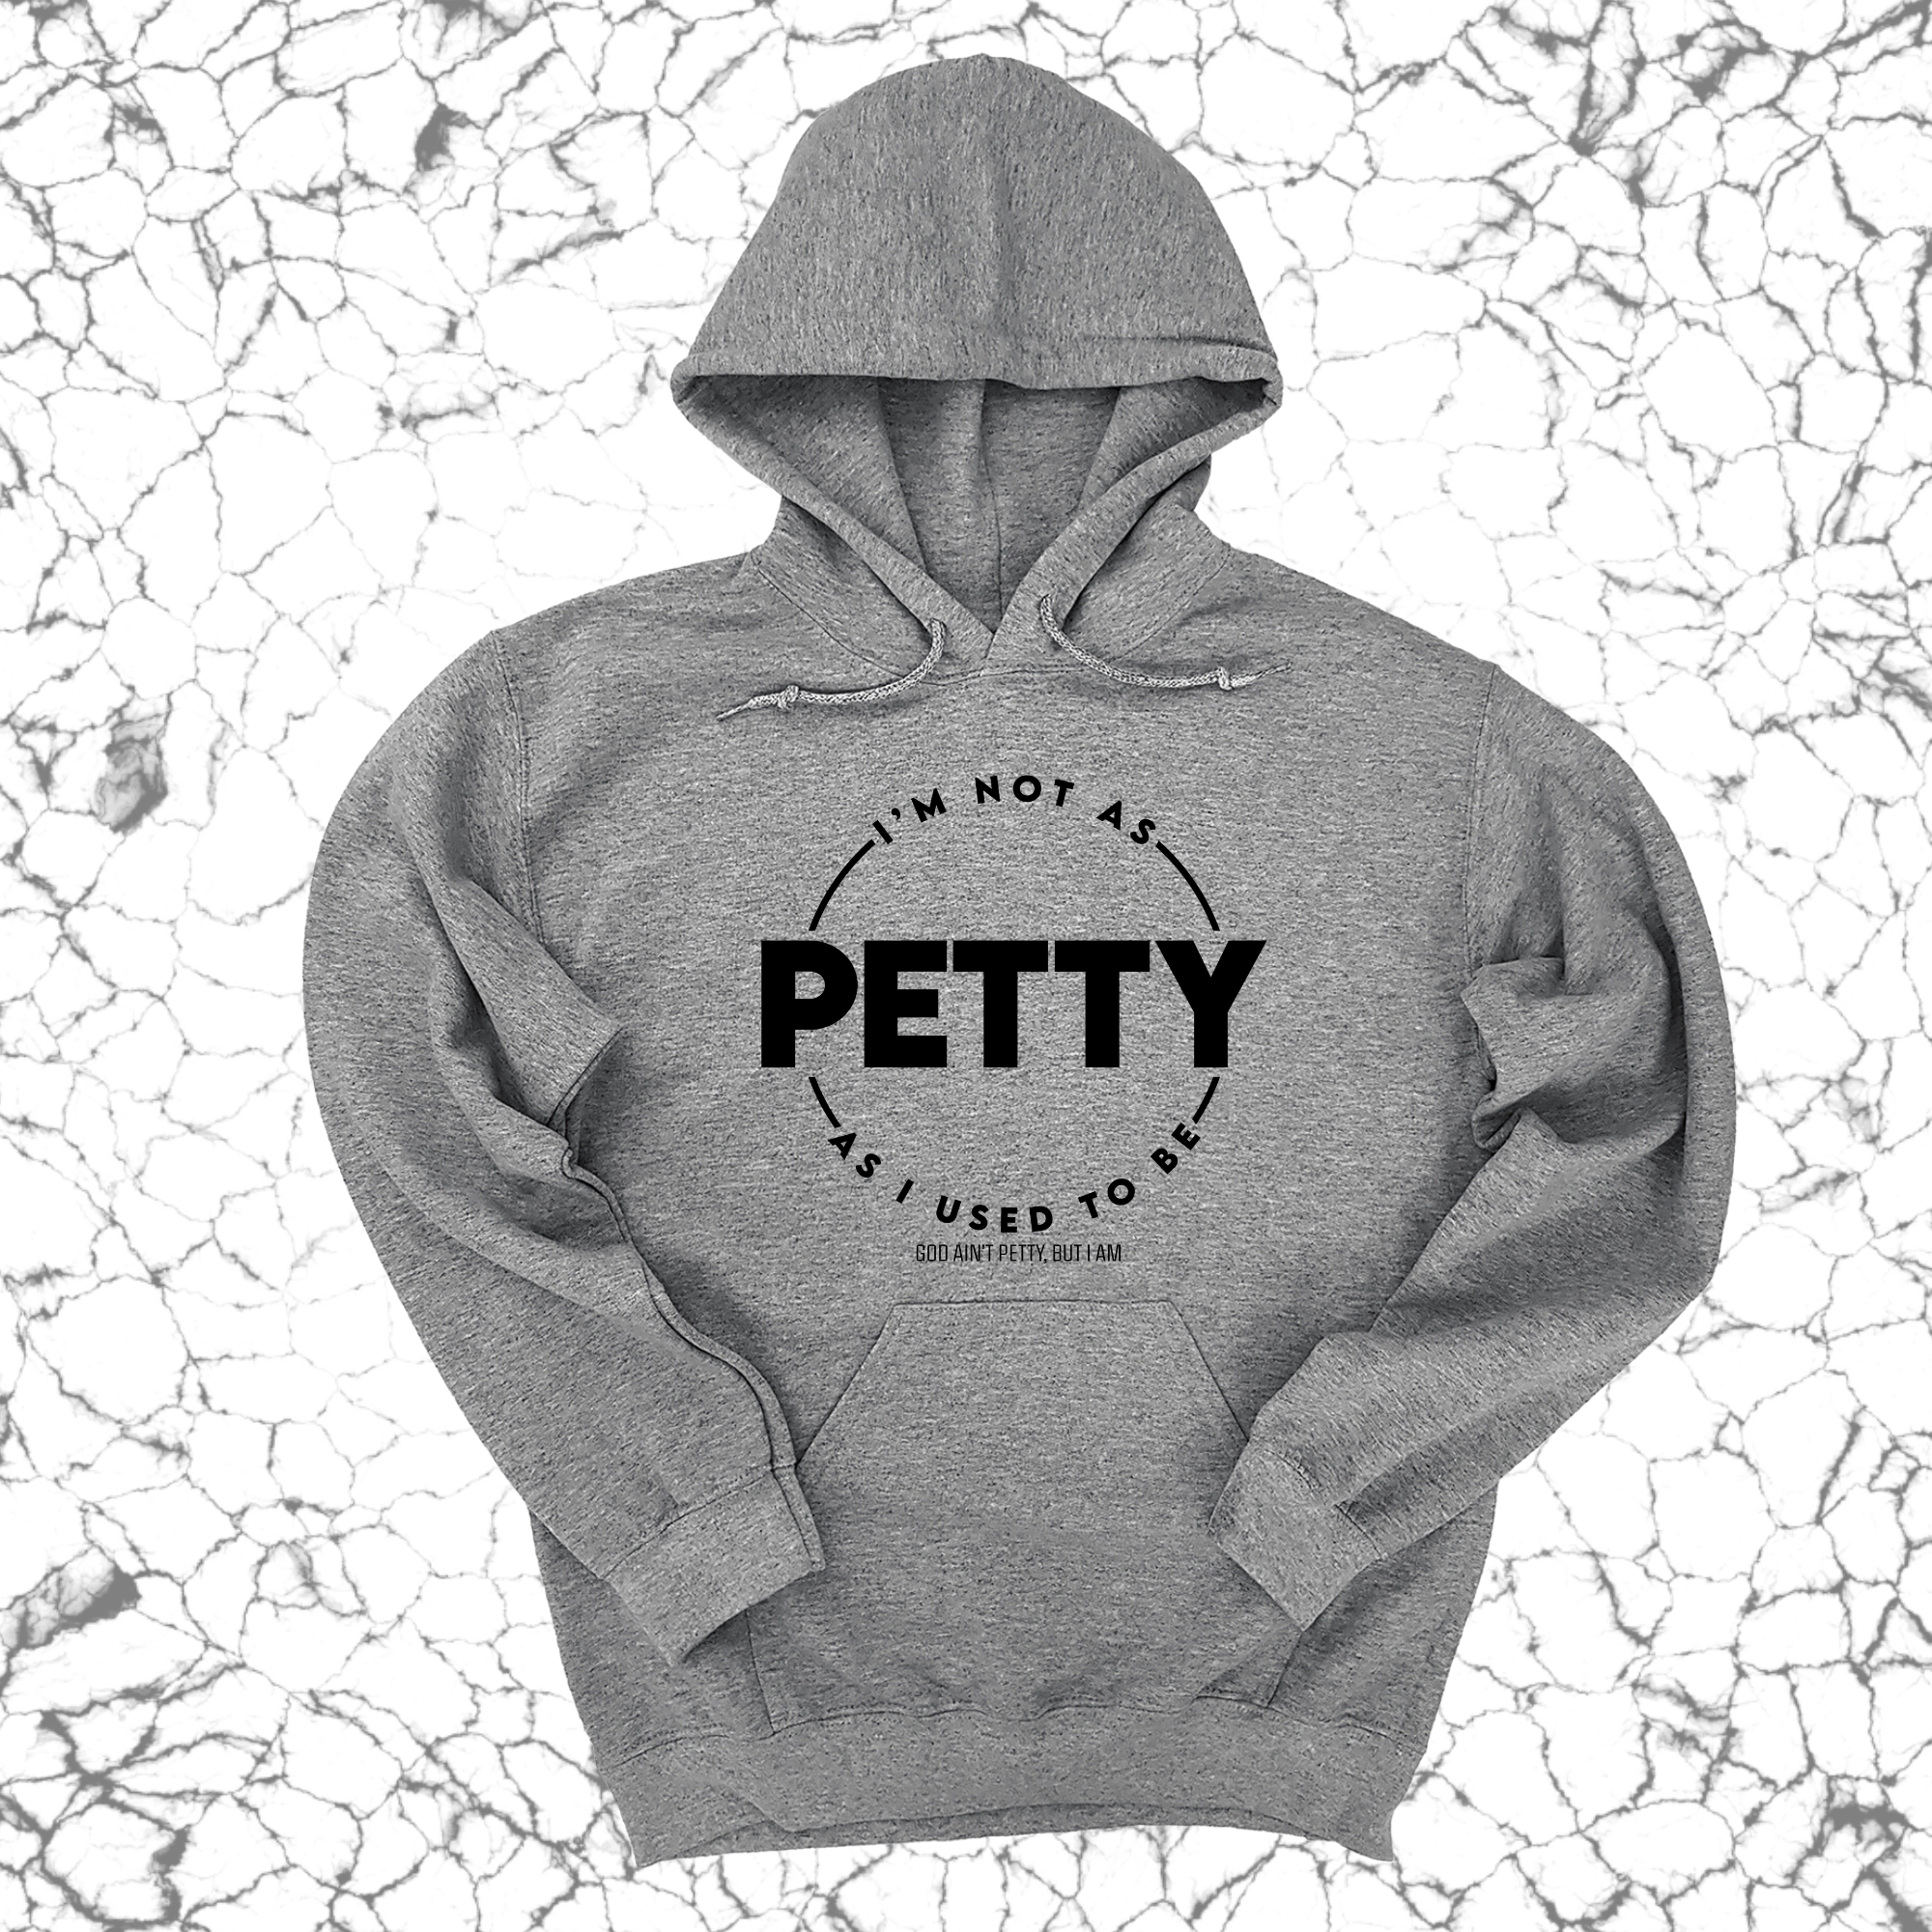 I'm not as petty as I used to be Unisex Hoodie-Hoodie-The Original God Ain't Petty But I Am